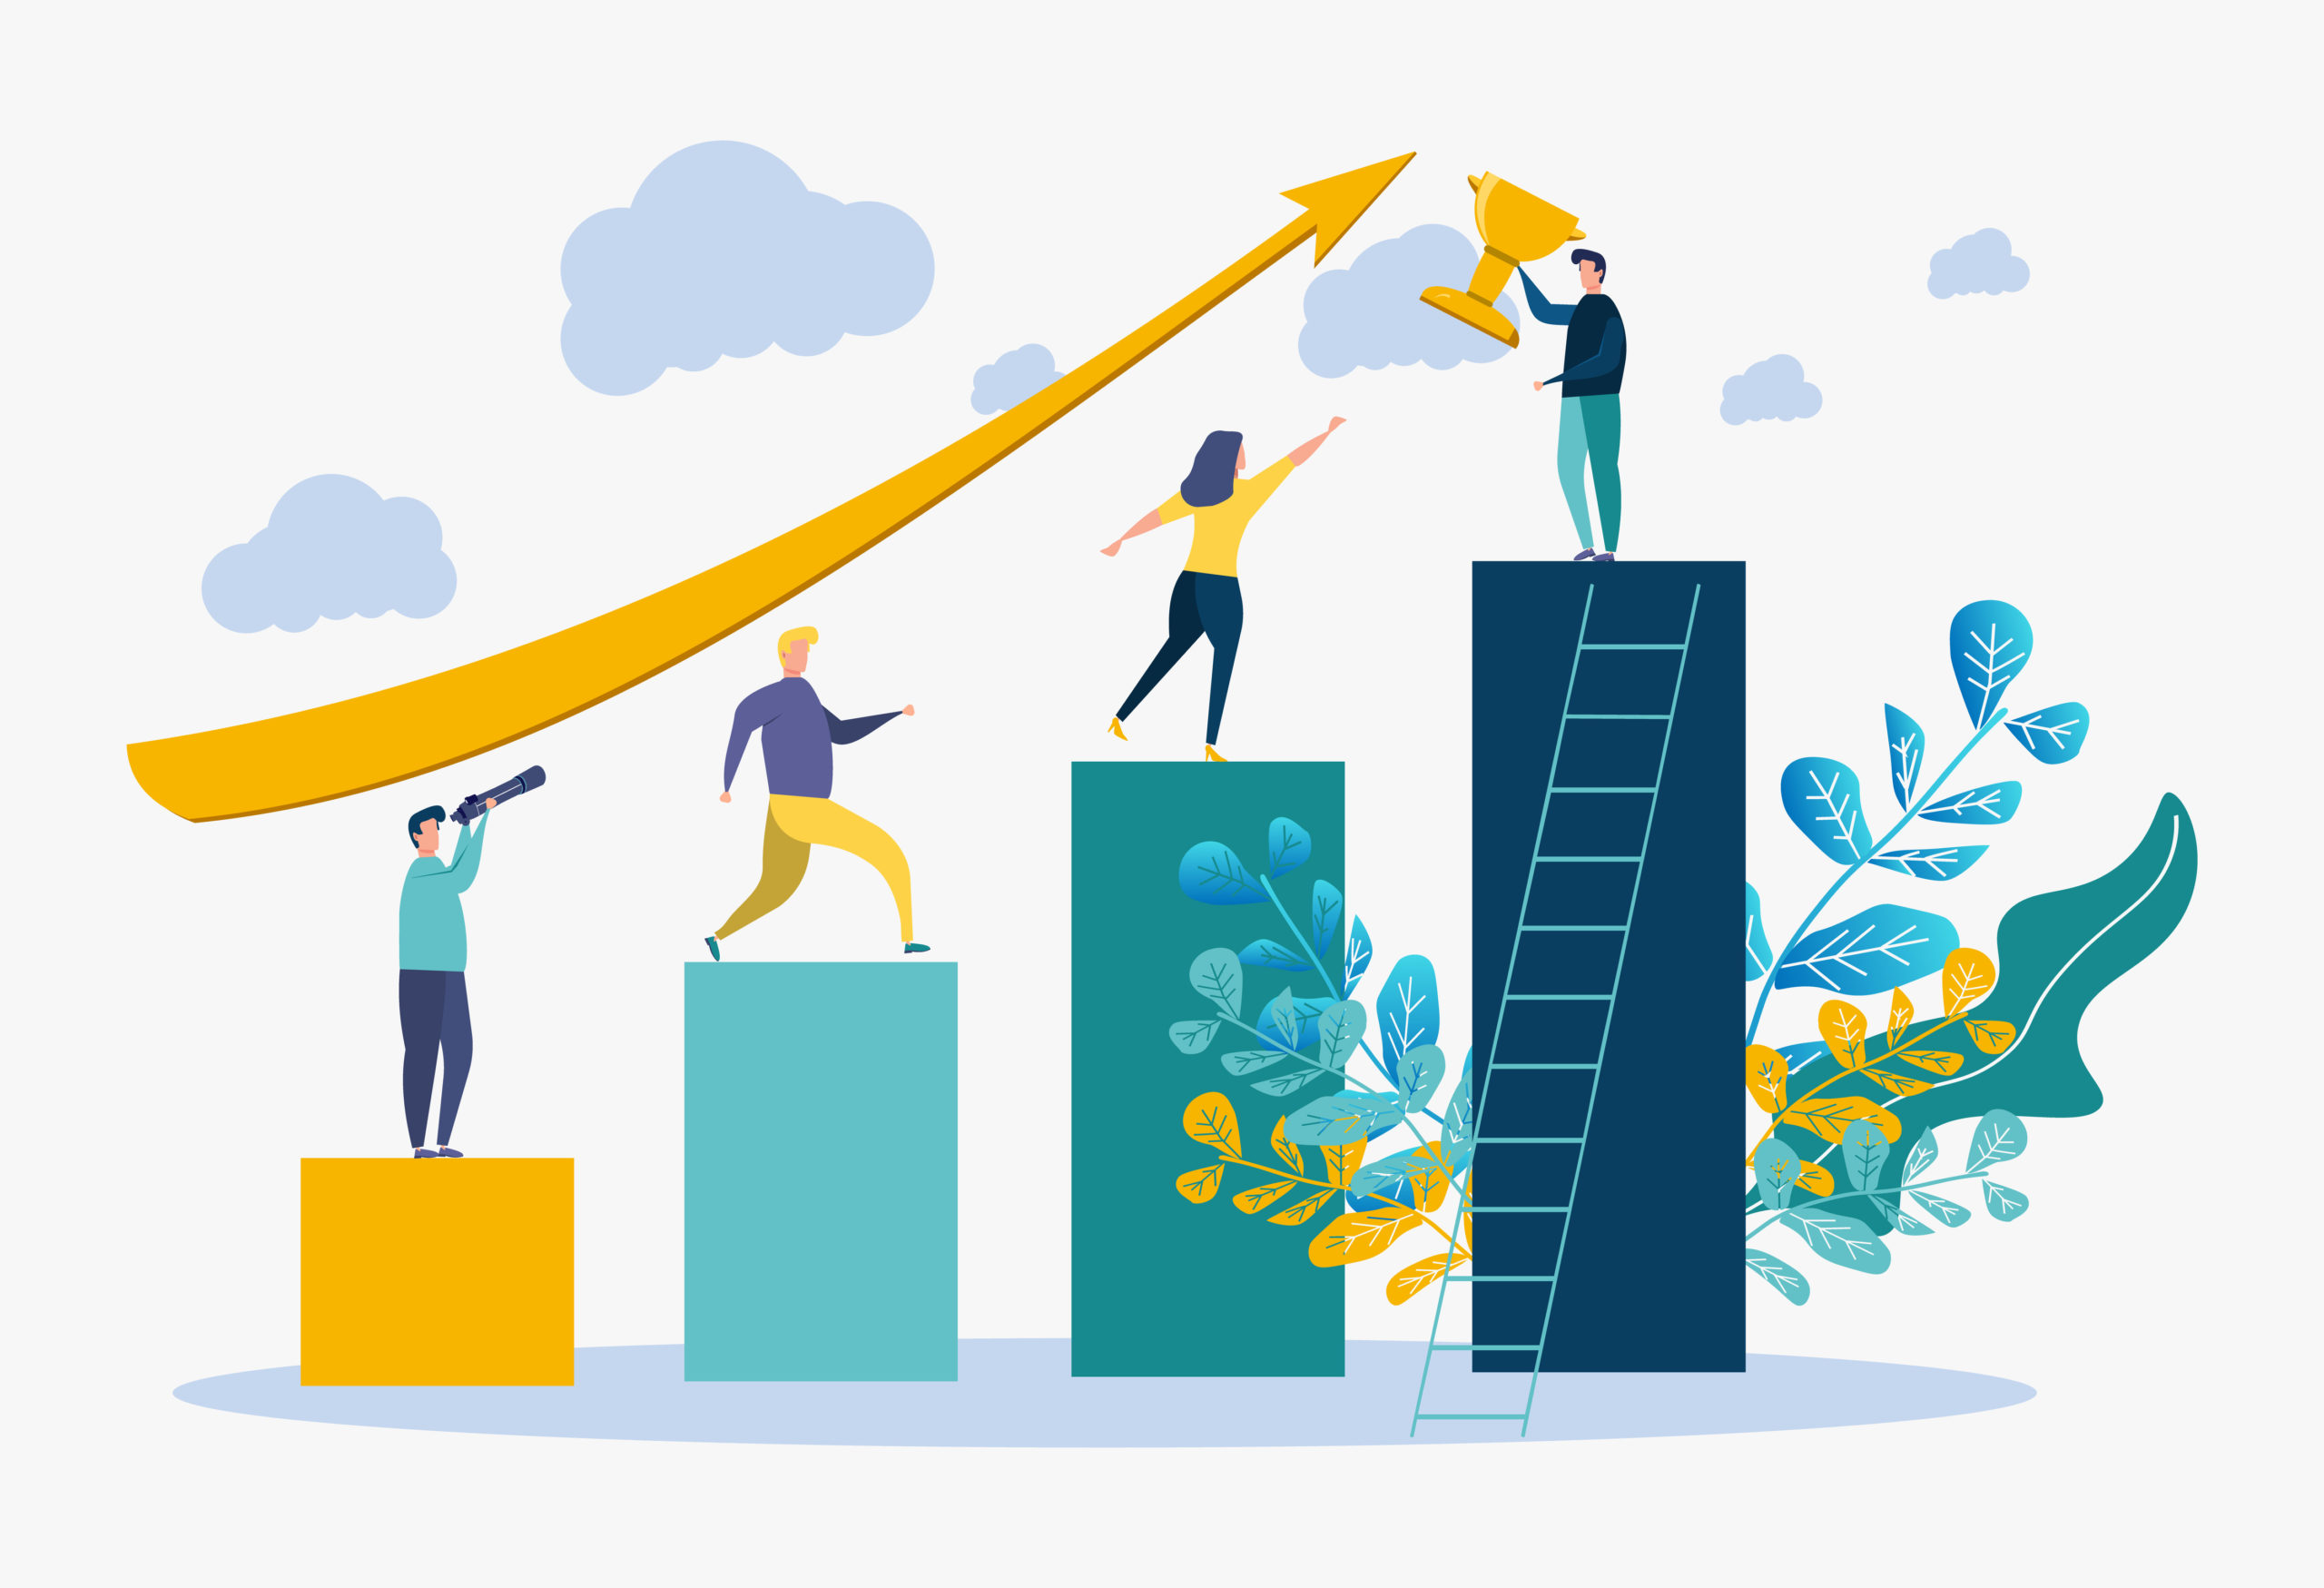 Colorful vector illustration, people run to their goal, move up by motivation, goal achievement, concept of goal achievement in business, winner, victory in the first place, number one.